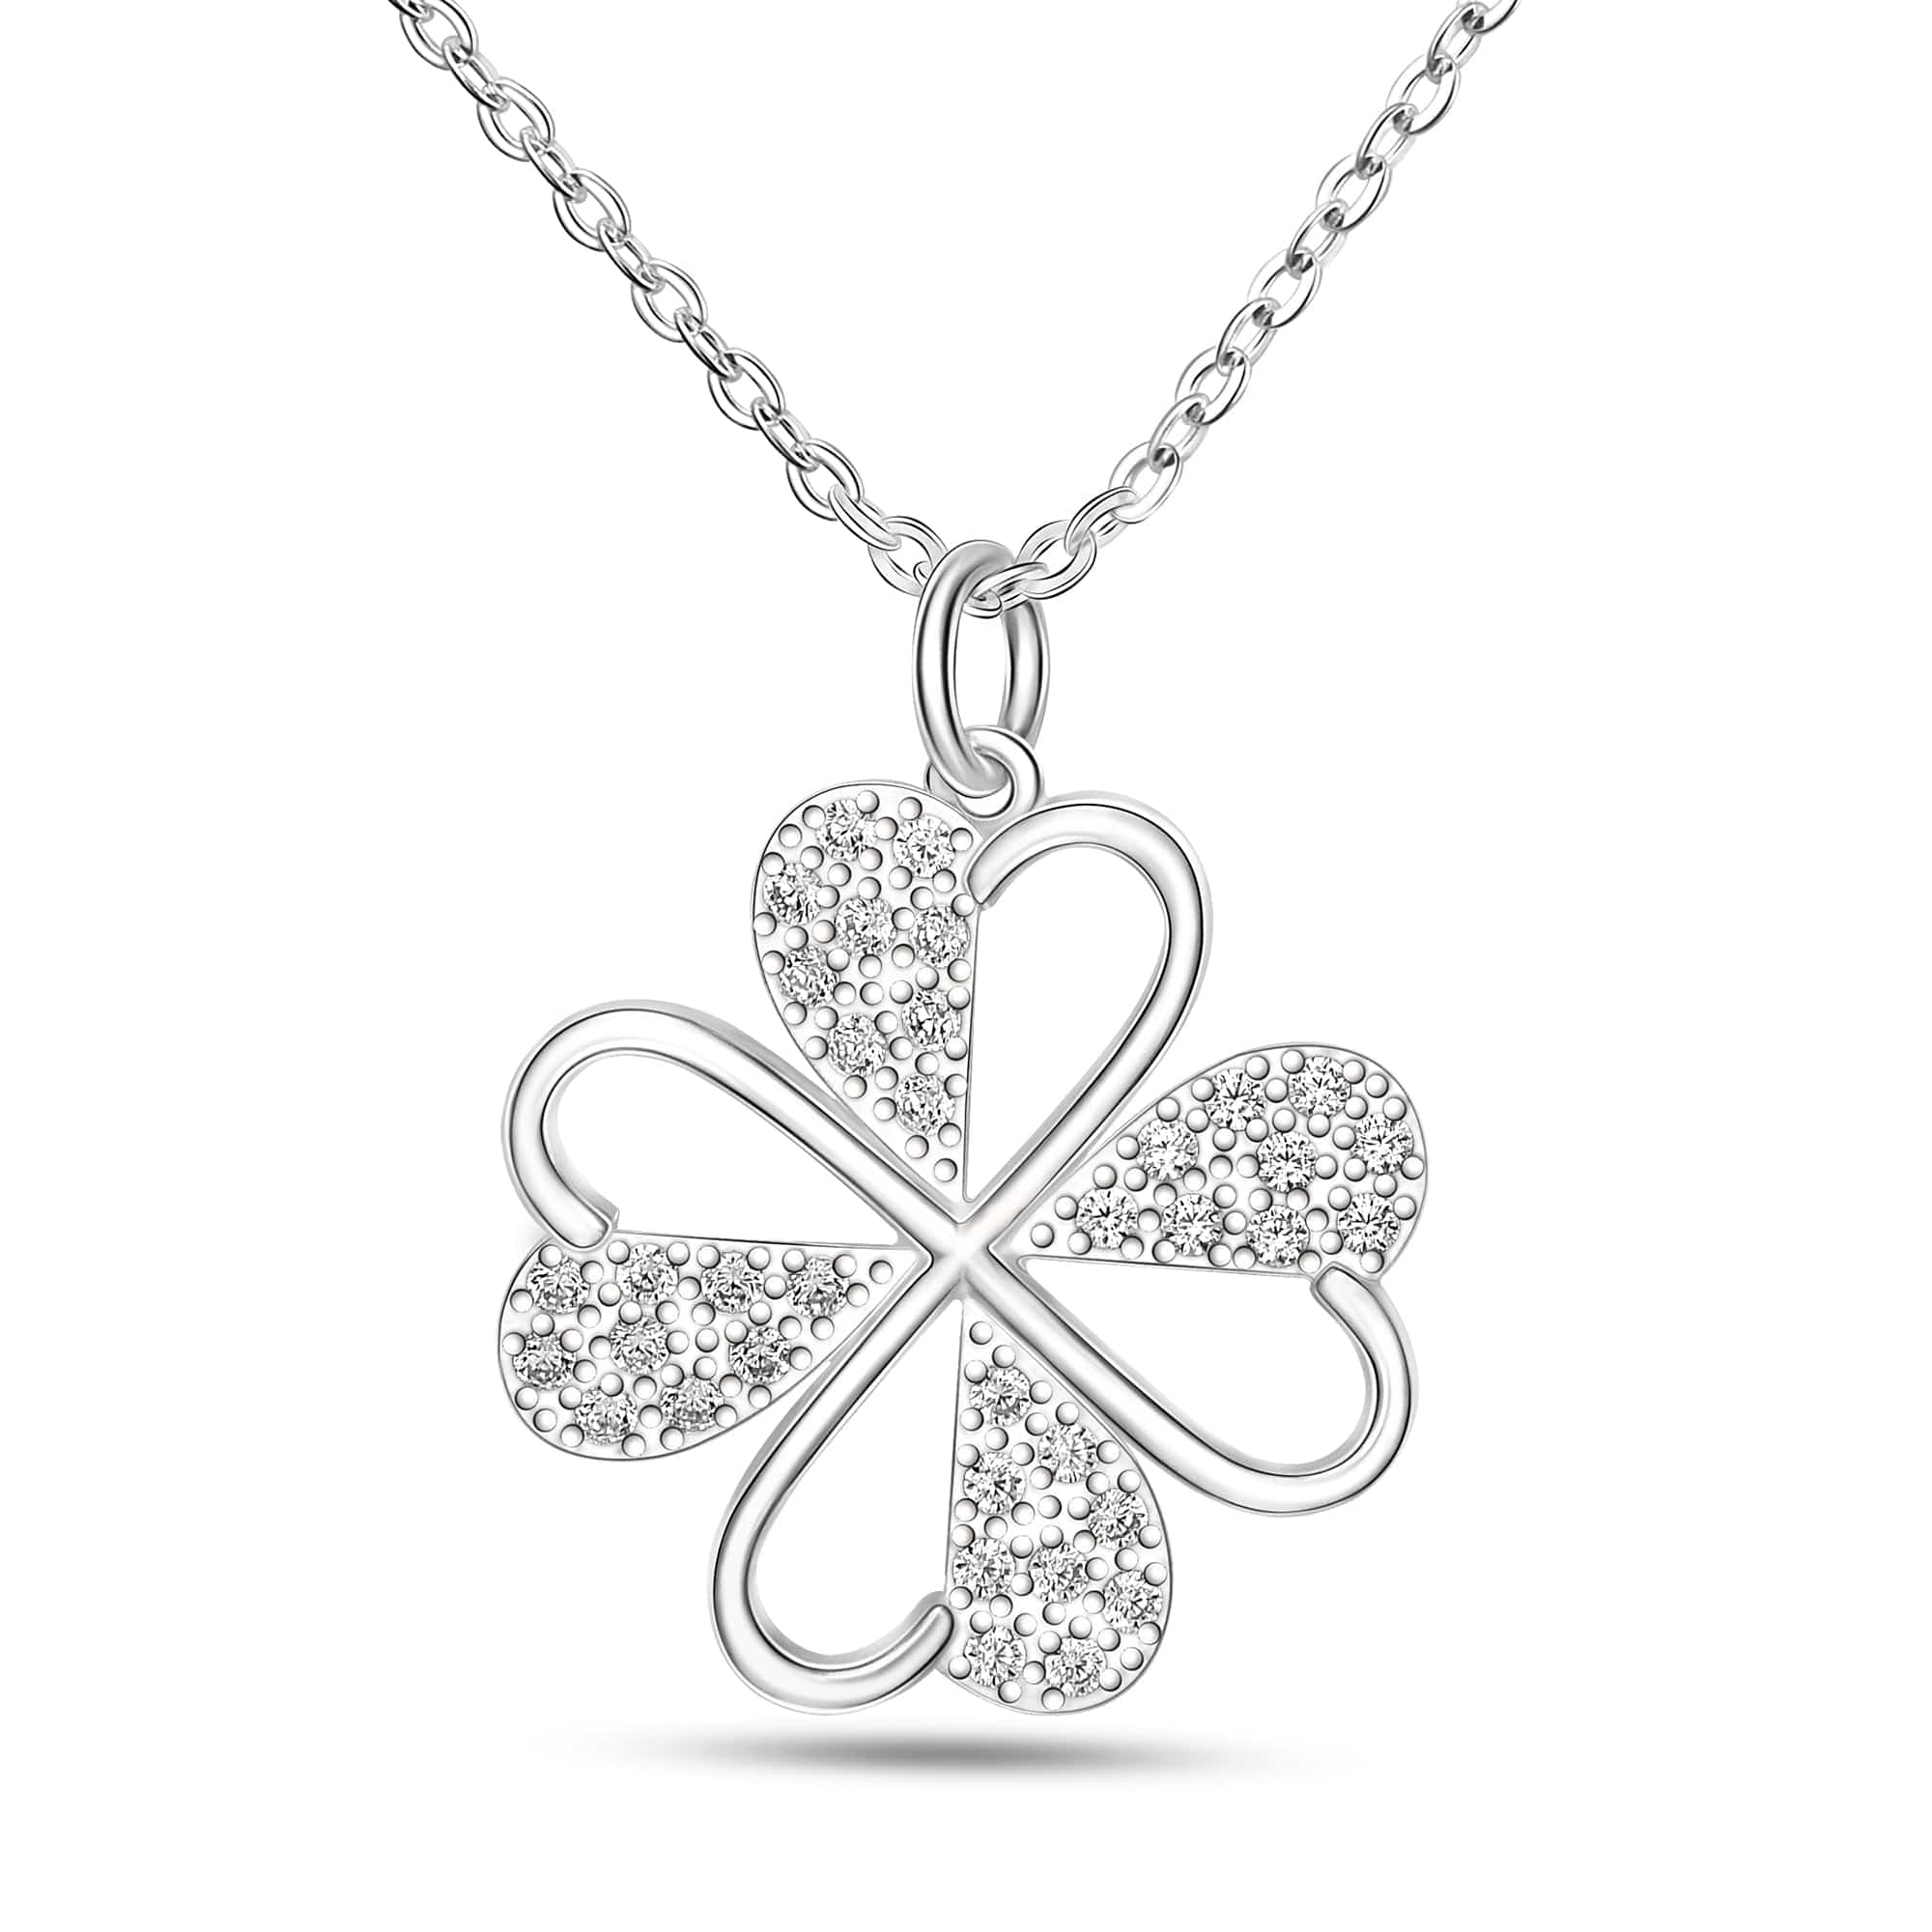 Lucky Infinity Heart Four Leaf Clover Necklace Silver Pendant Necklace